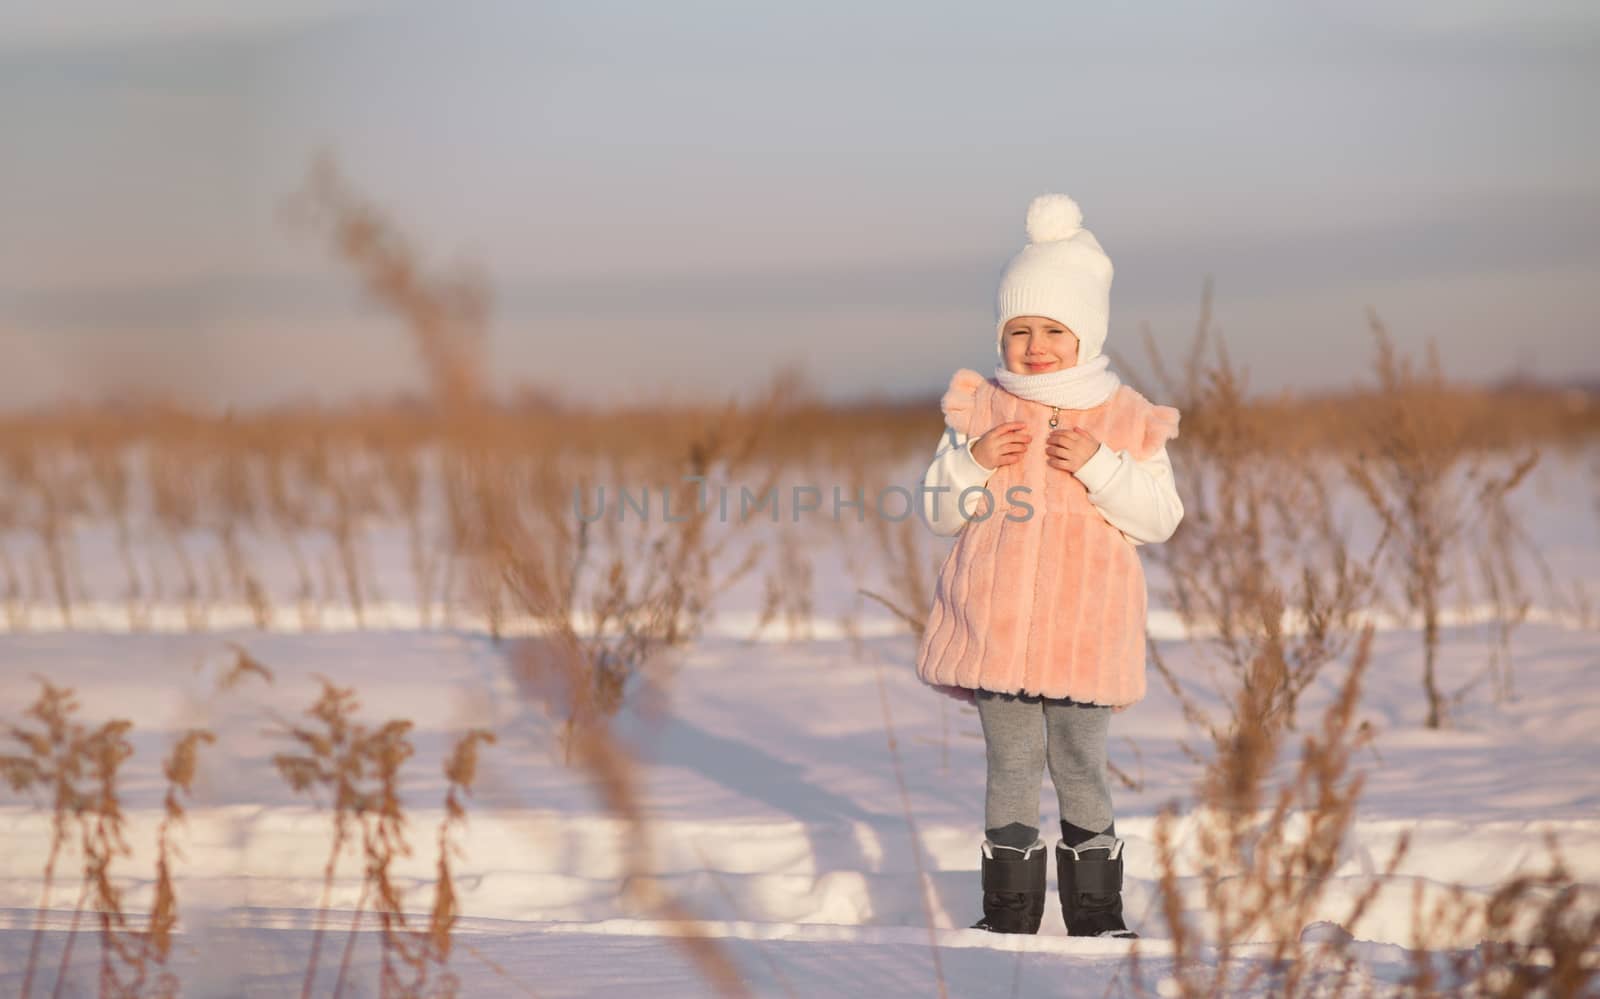 A little girl stands in the middle of a field in winter at sunset by galinasharapova